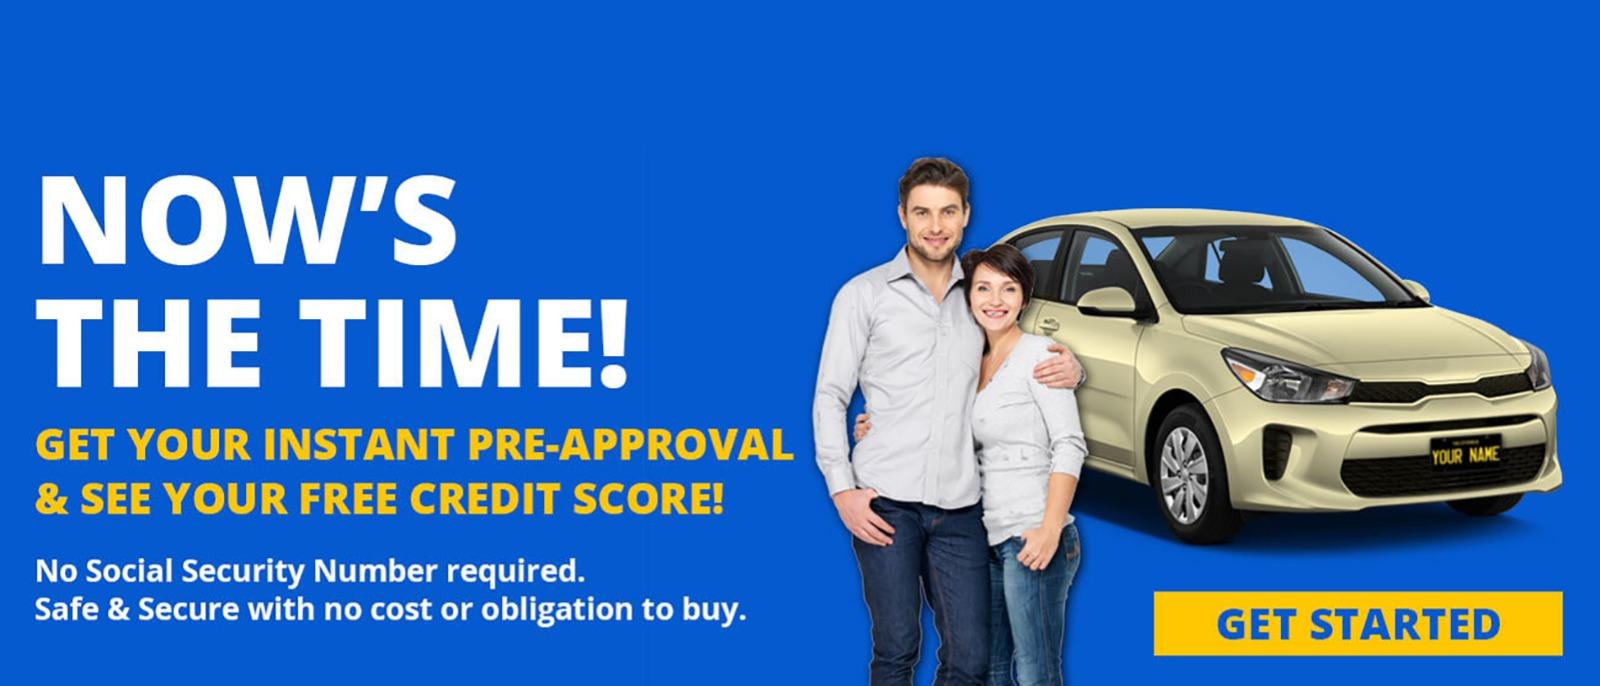 Now's The Time! Get your Instant Pre-Approval & See your Free Credit Score!